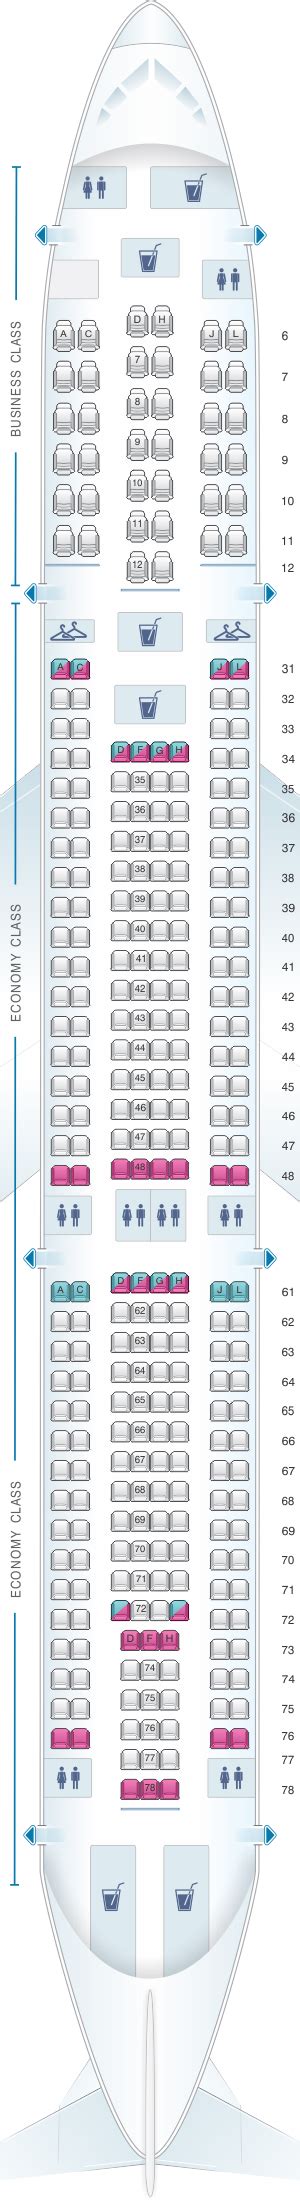 Turkish Airlines A330 Seat Map